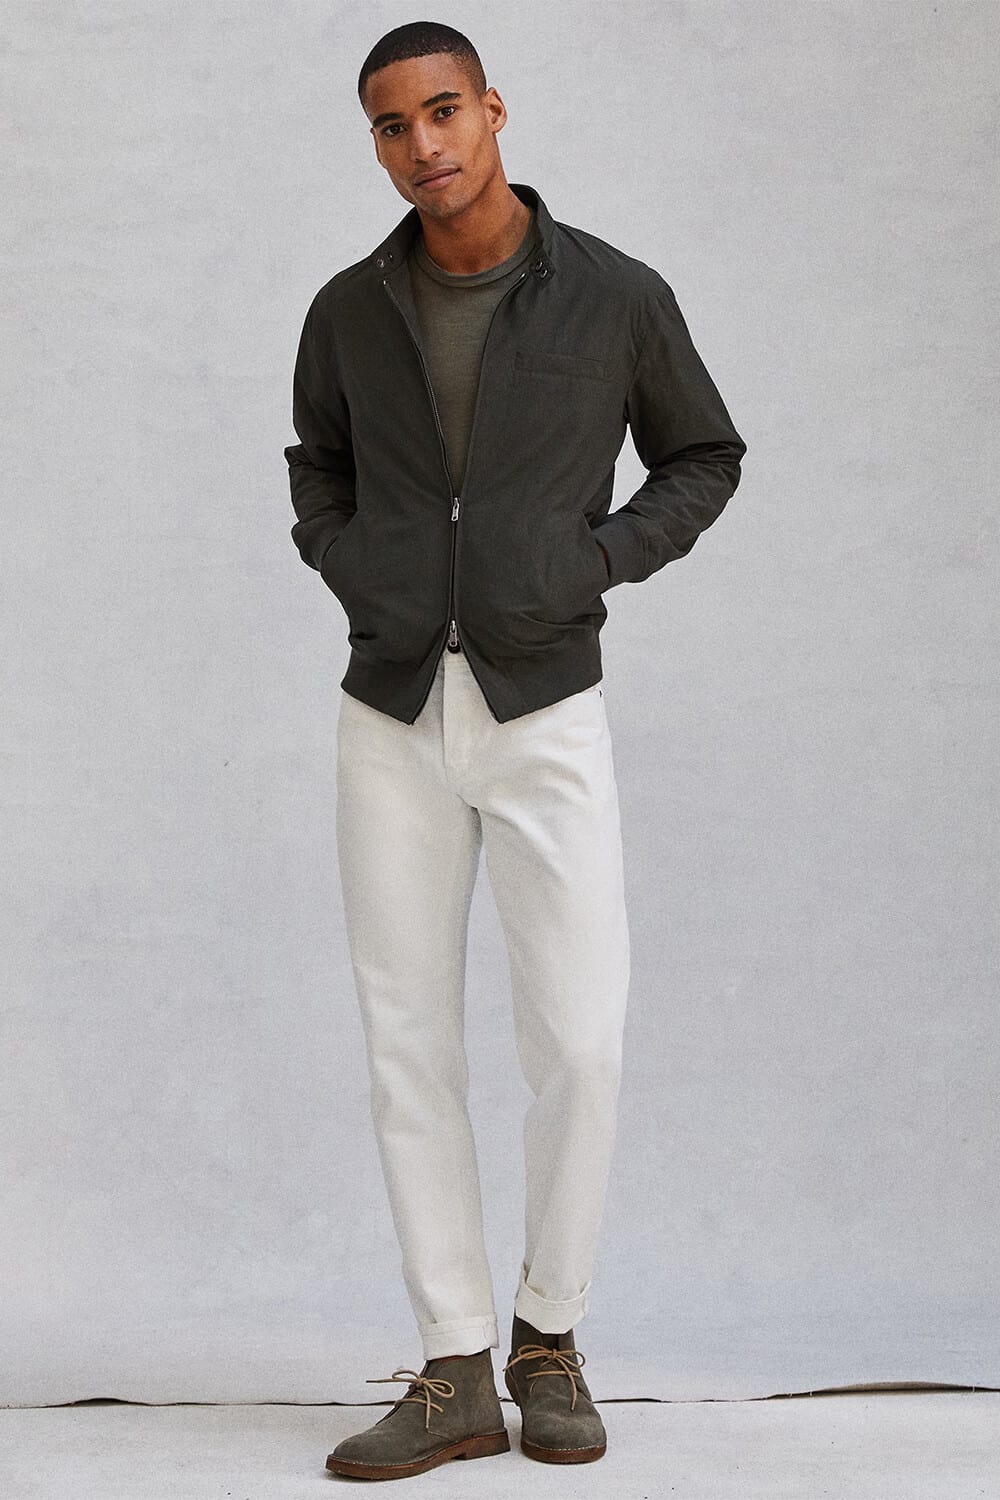 White Jeans Outfit Inspiration For Men: 16 Cool Looks For 2023